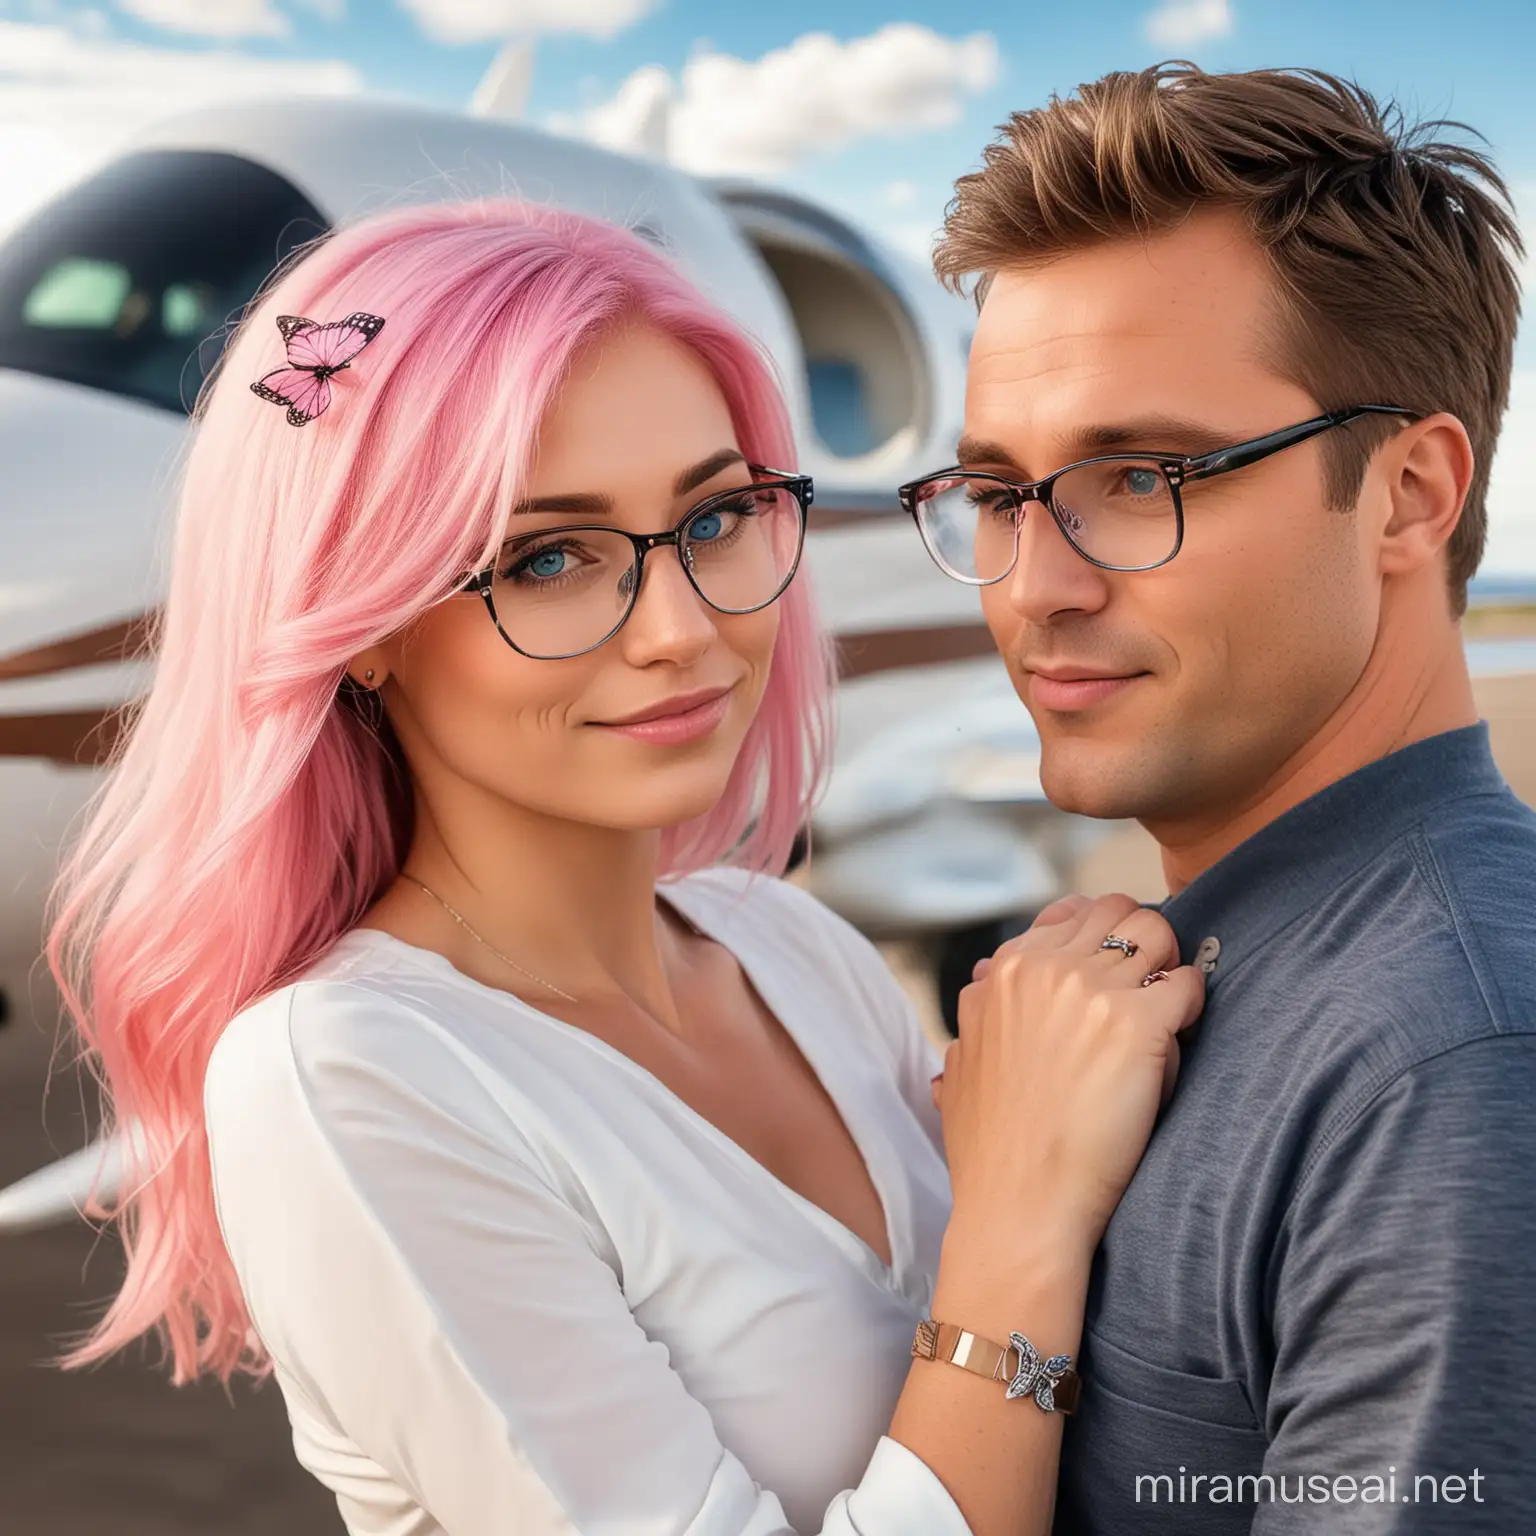 General a very attractive girl, blonde and pink hair, blue eyes, the woman has a butterfly on her wrist, The woman's husband brown hair and blue eyes, the woman wears glasses and the man is a , he hugs his wife and kissing her,In the background, their large private plane 